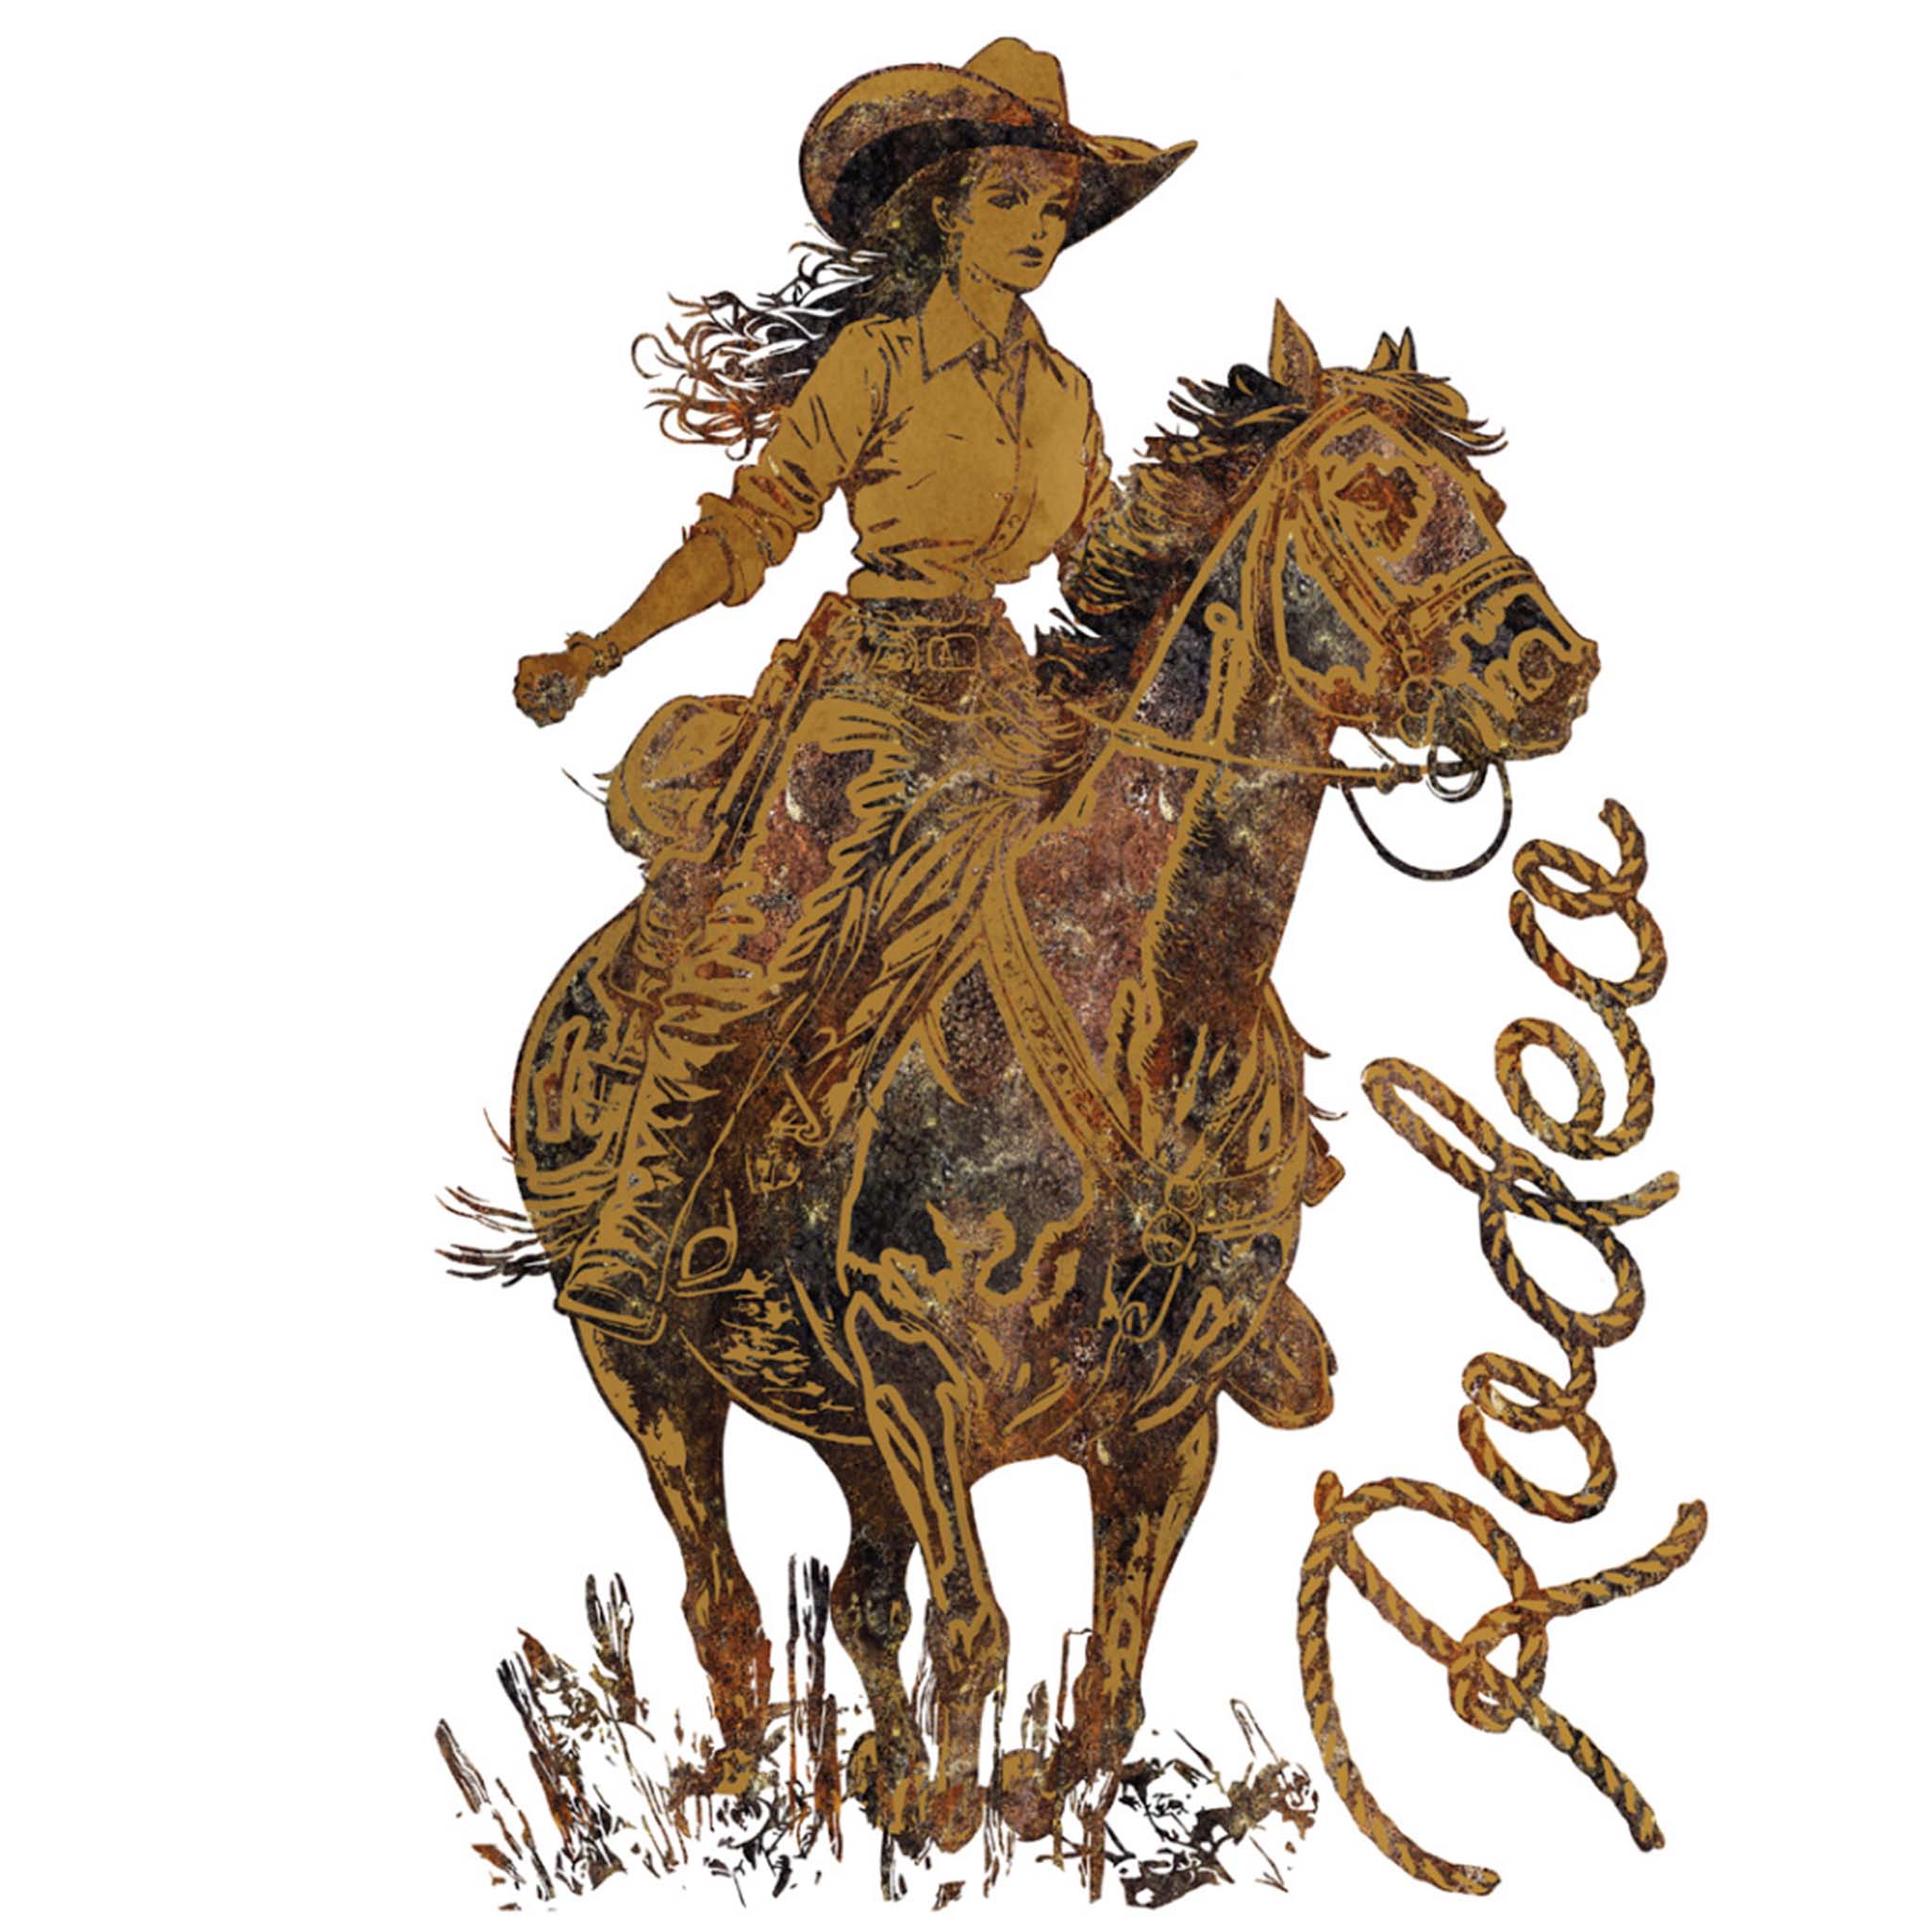 Rub-on transfer design against a white background featuring a mustard-colored image of a cowgirl riding a horse, with the word "rodeo" written in rope.